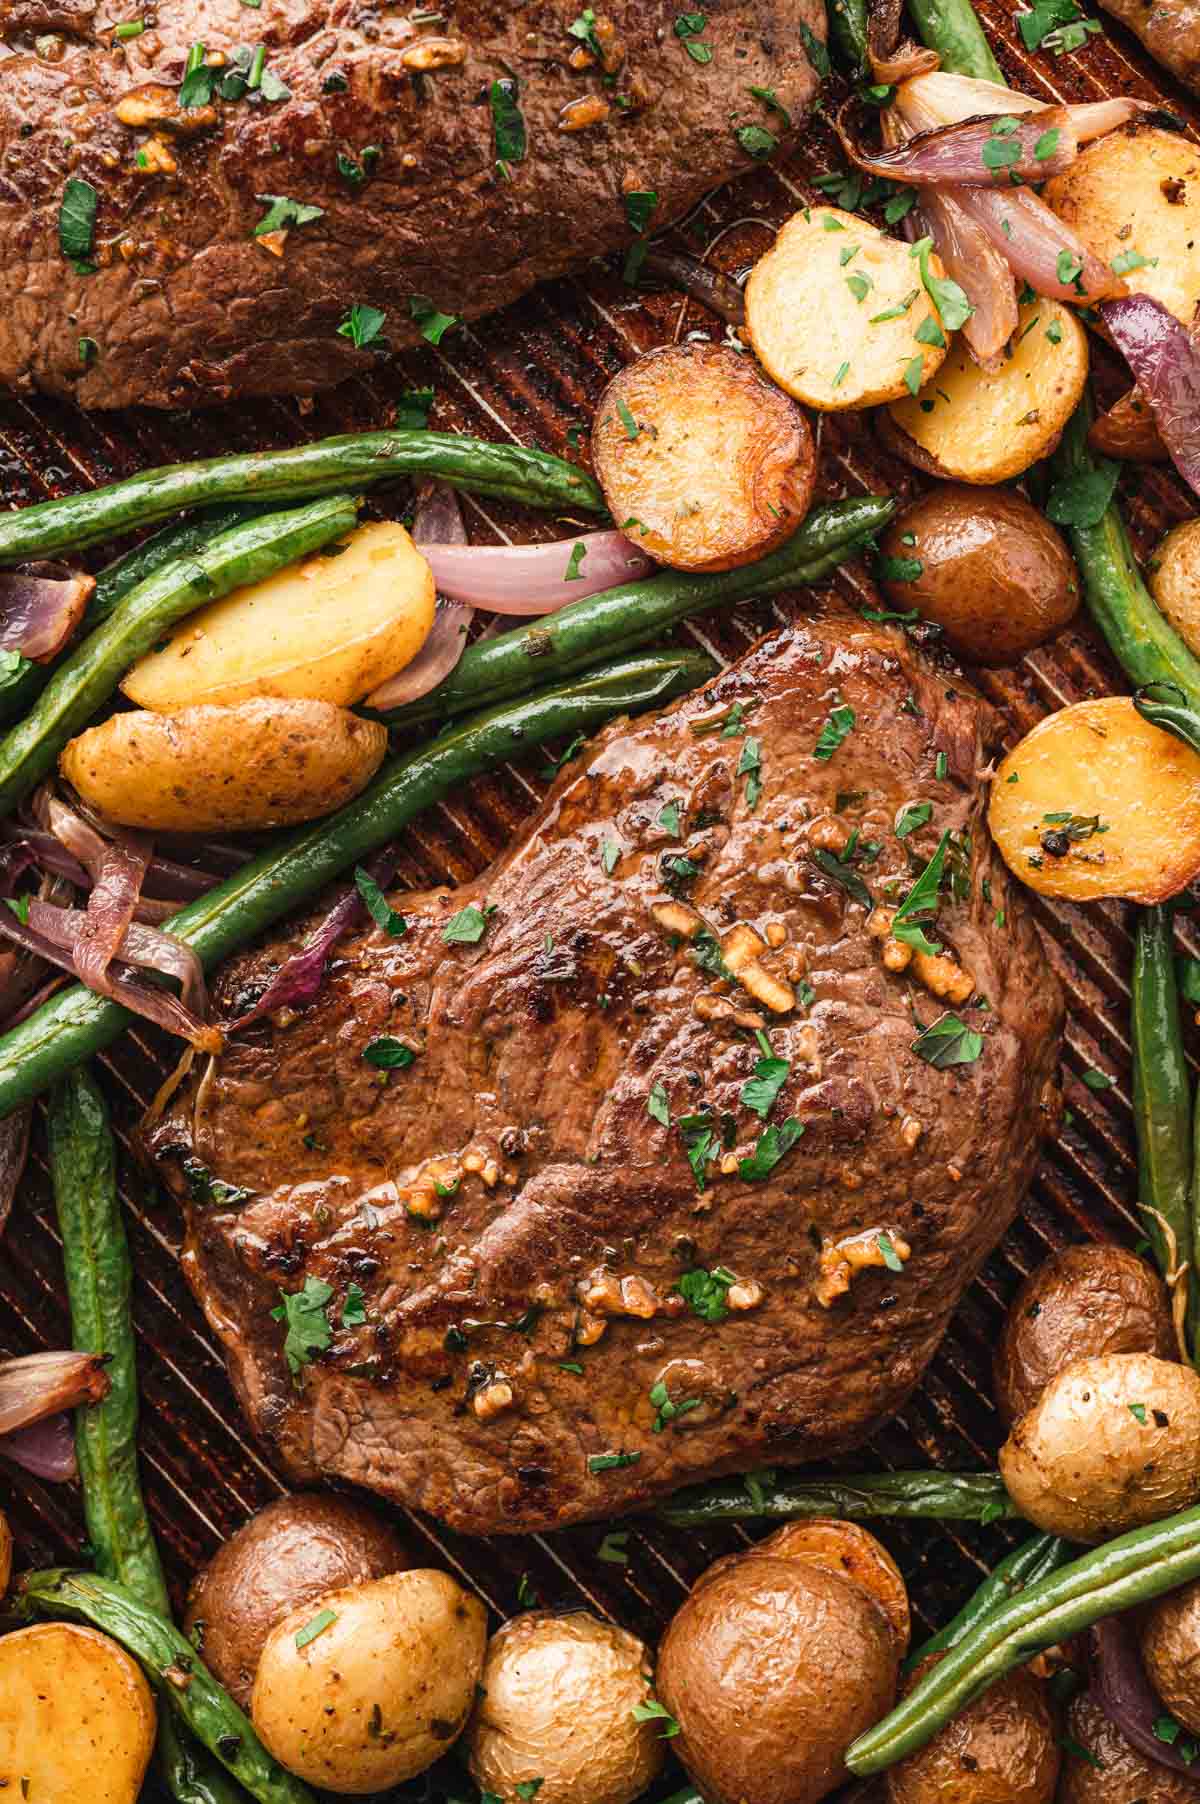 Cooked juicy steak, green beans and potatoes on a sheet pan.